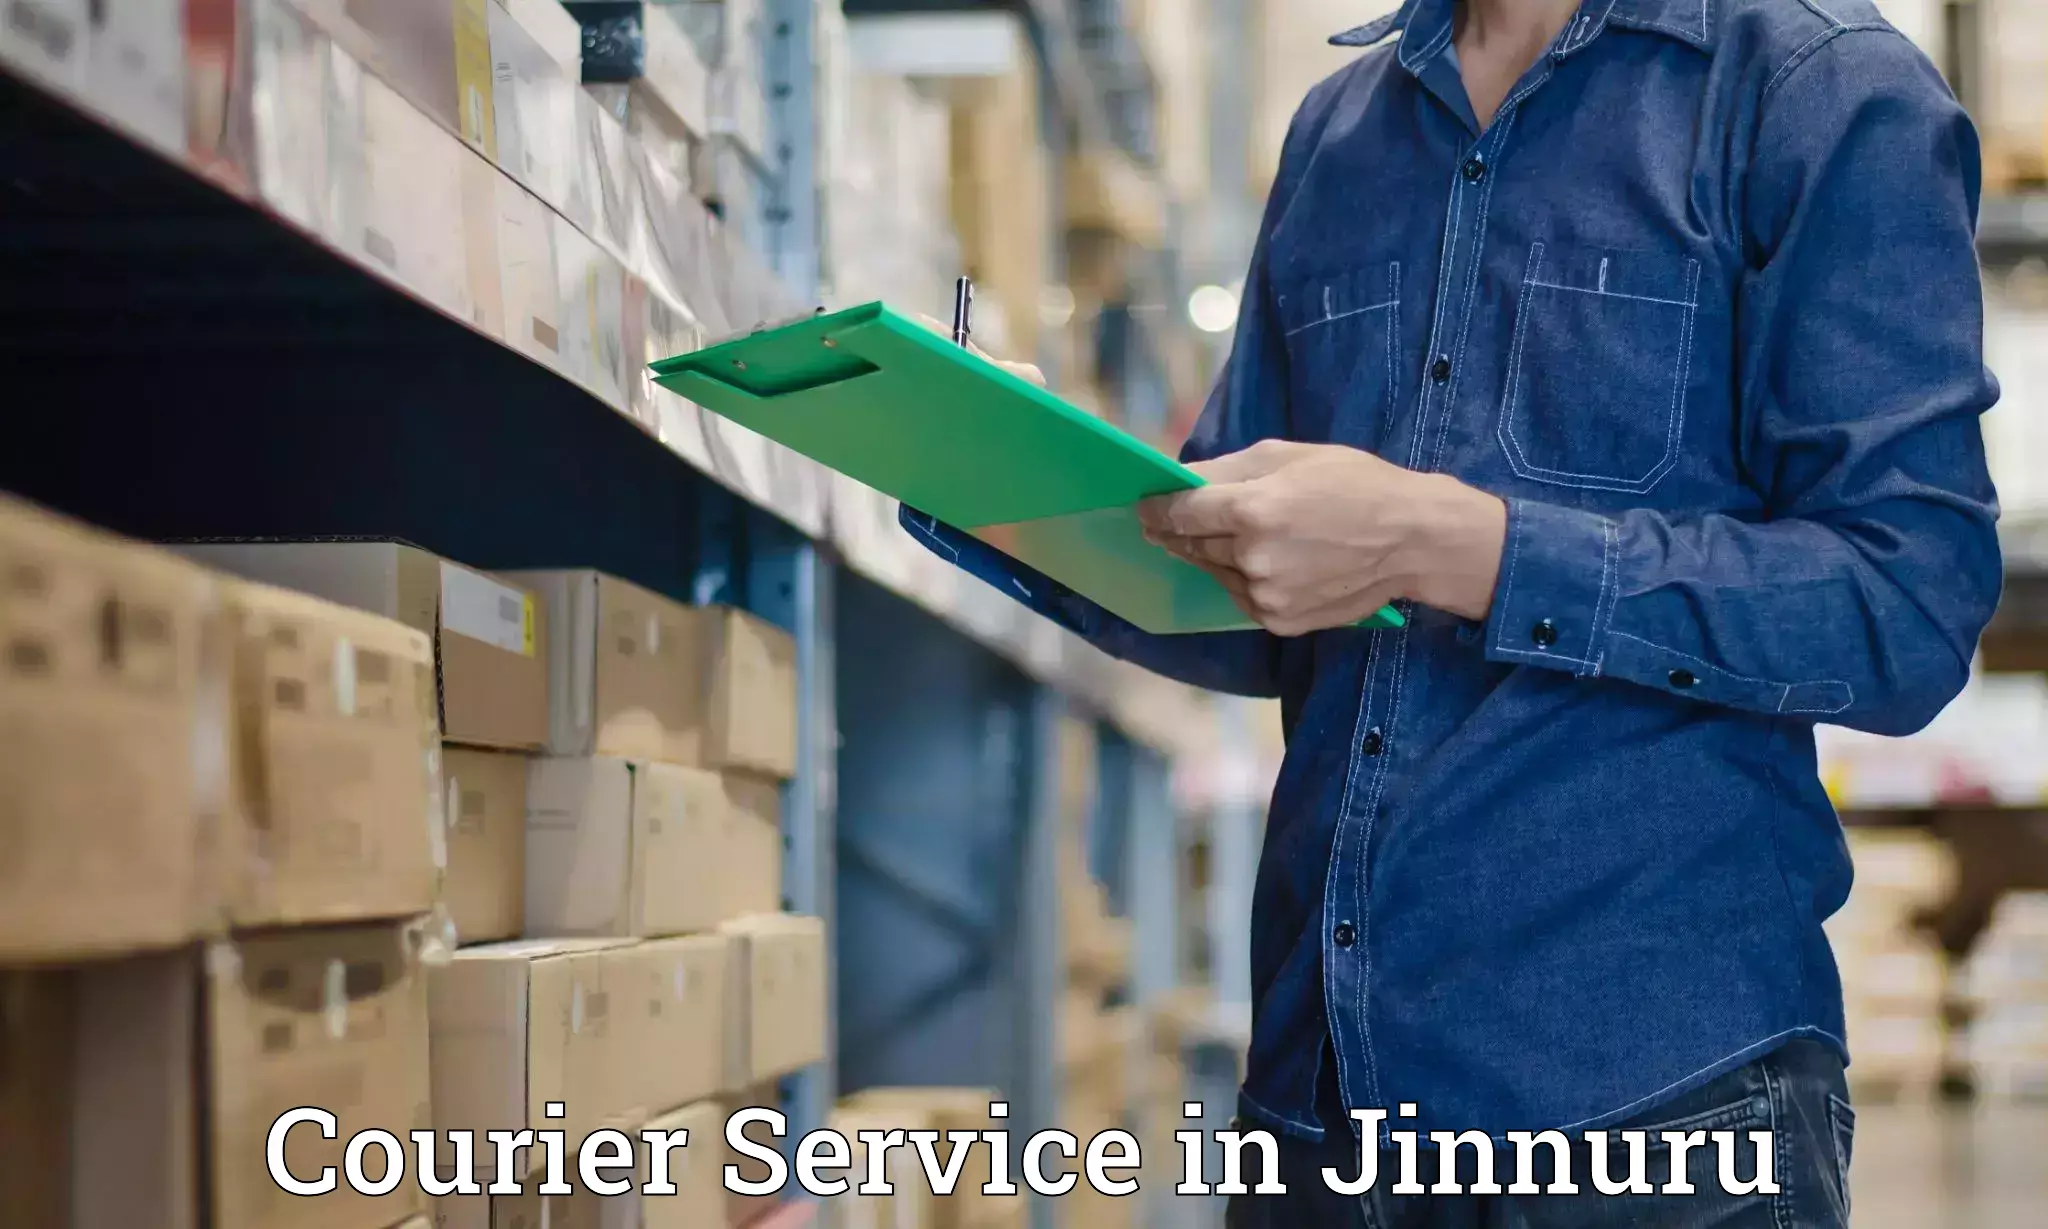 Reliable shipping solutions in Jinnuru